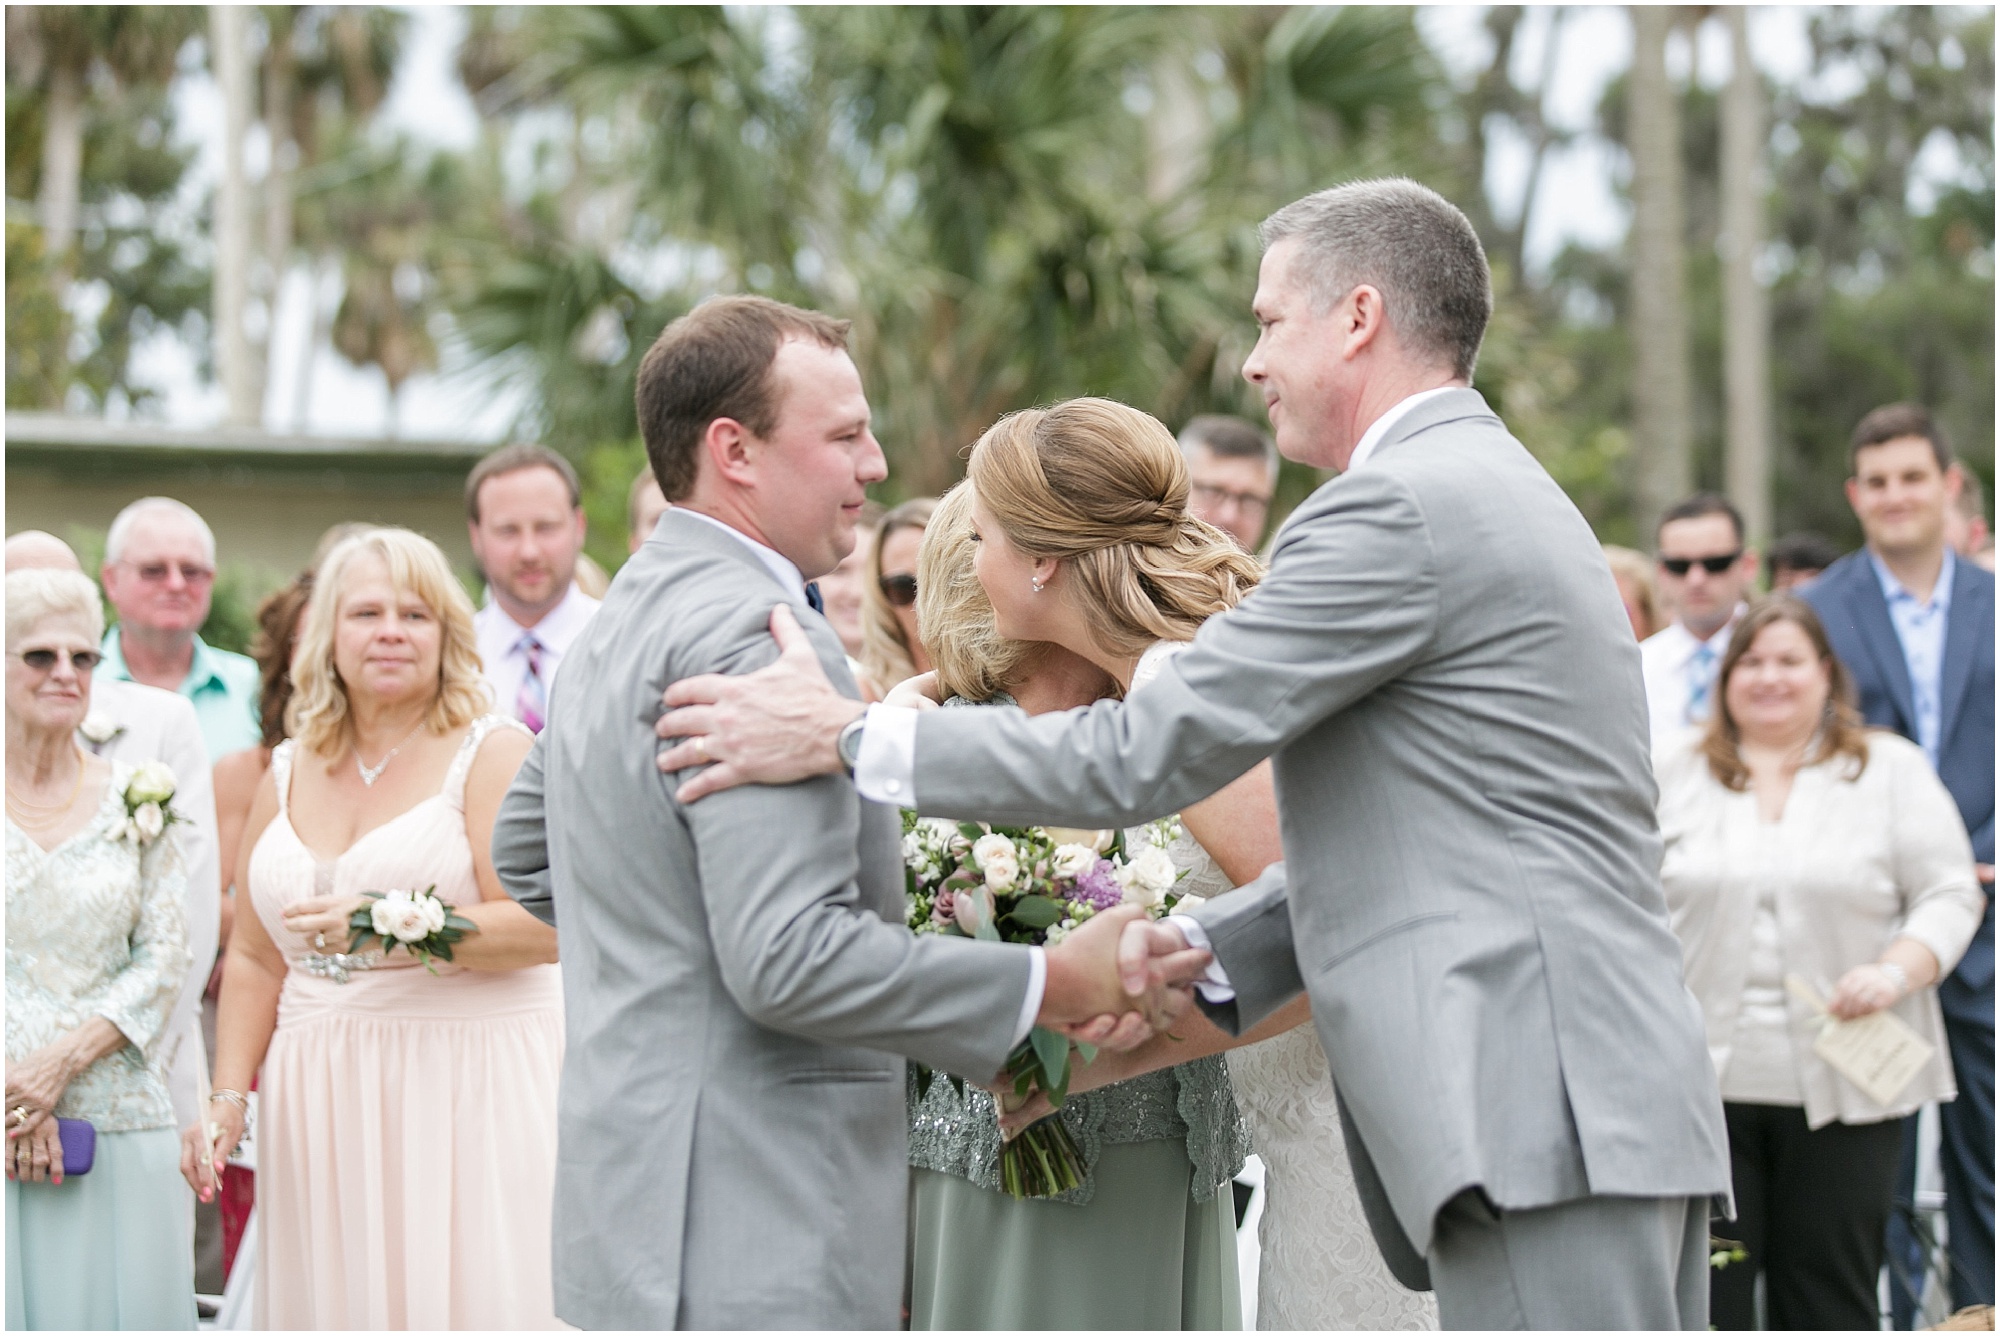 Bride hugs her mom and groom shakes her dad's hand.